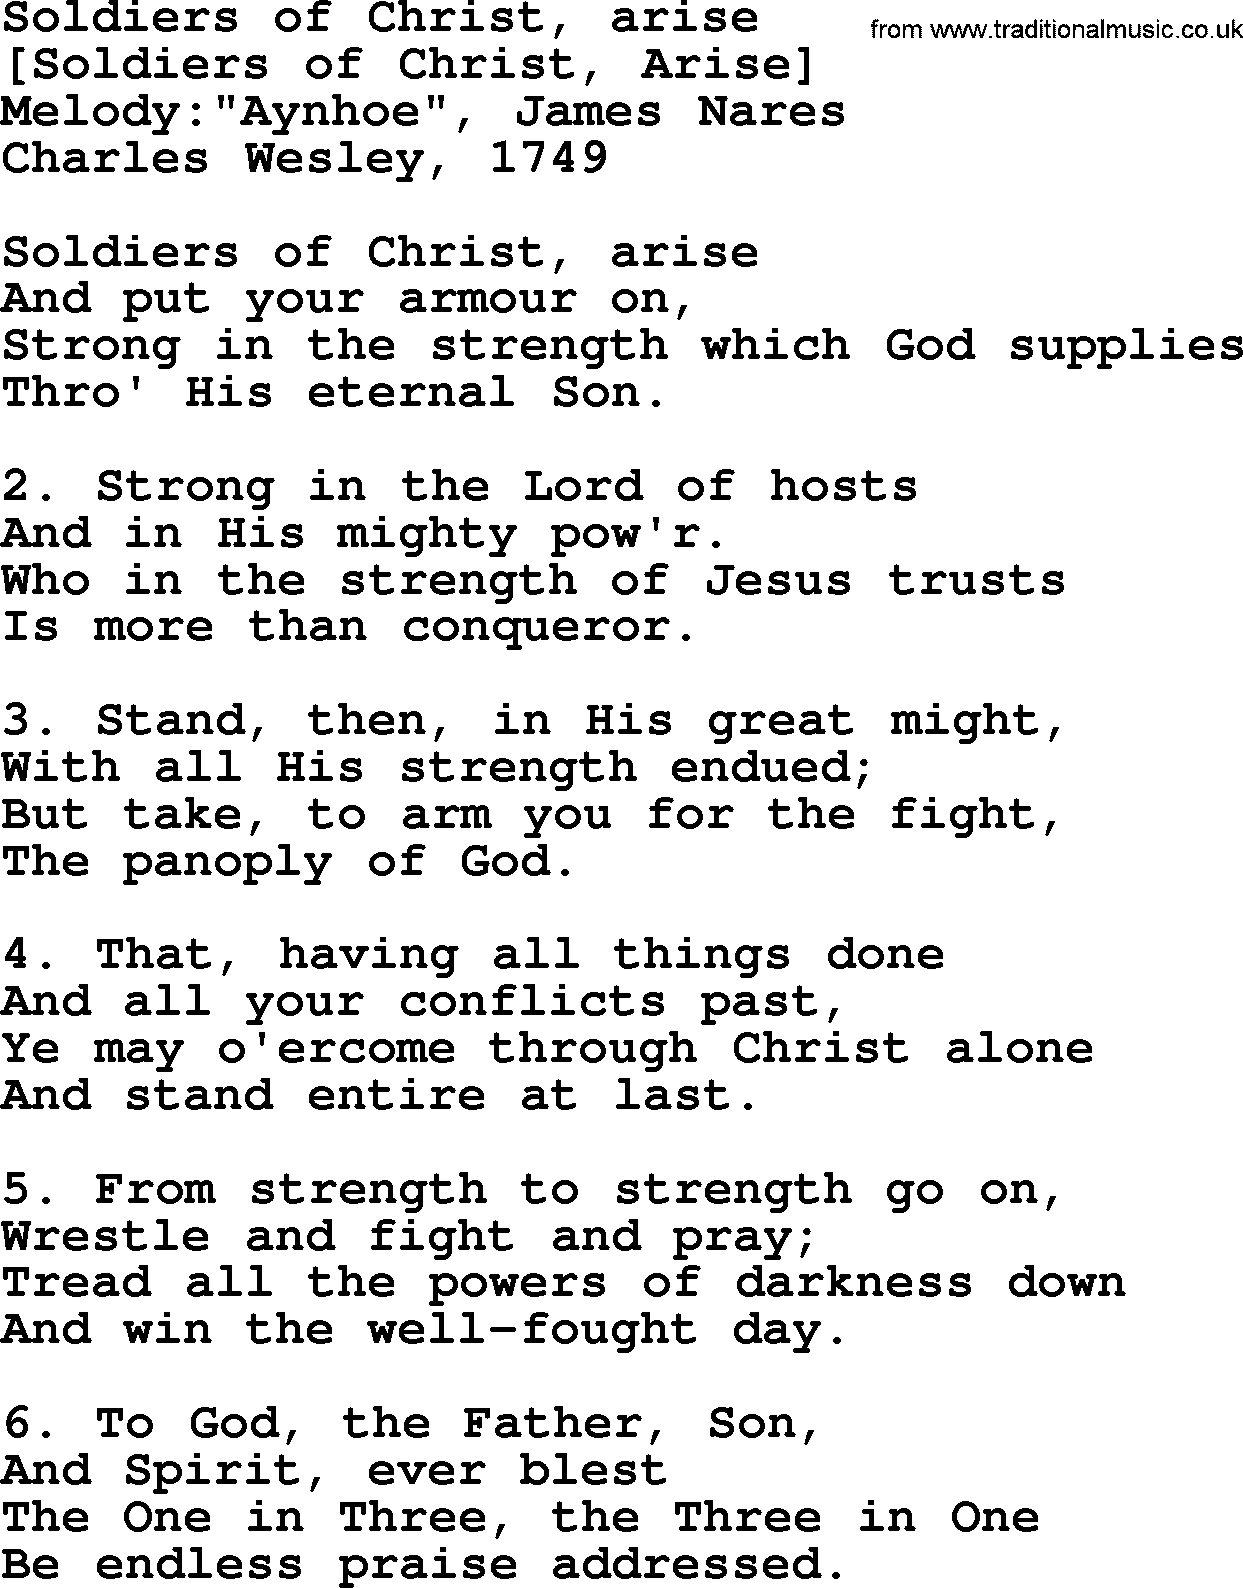 Old English Song: Soldiers Of Christ, Arise lyrics